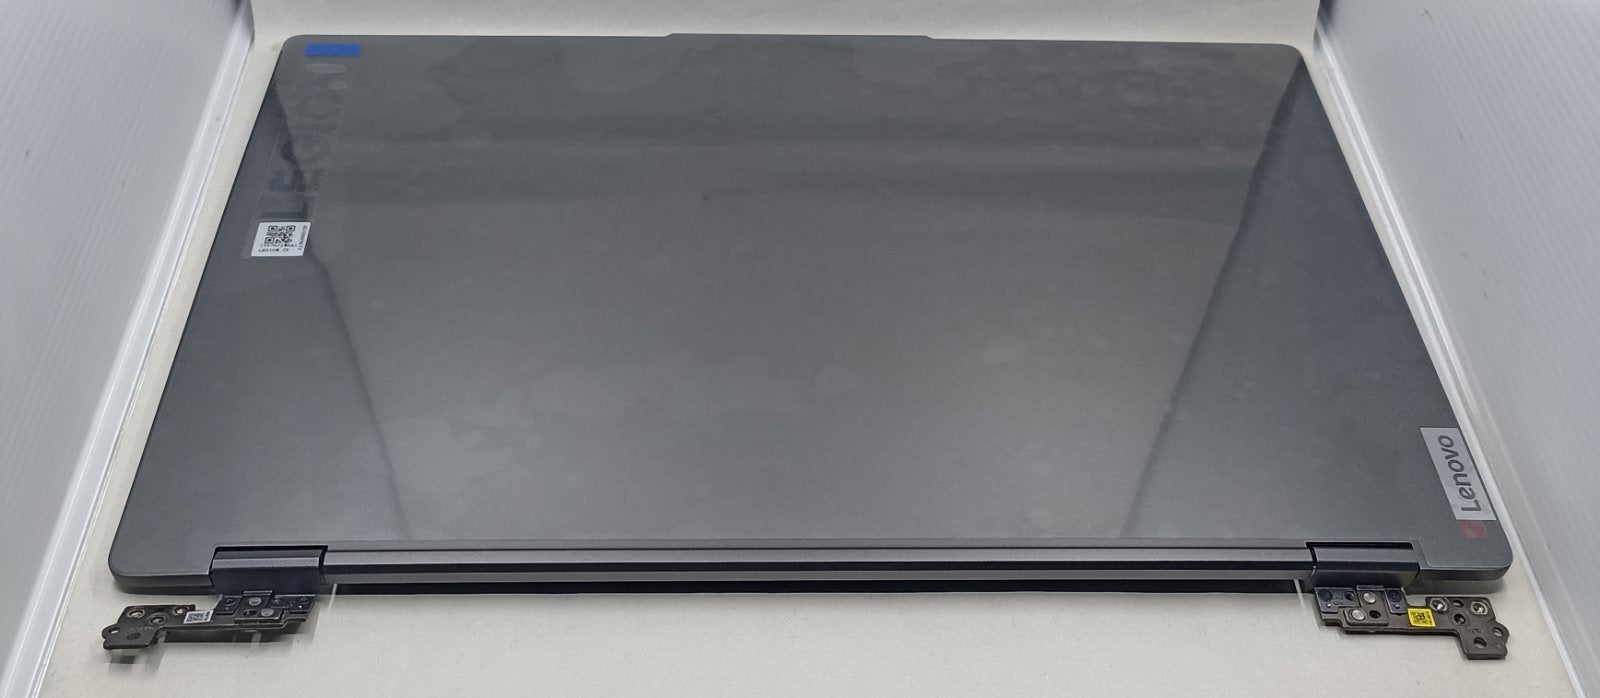 Replacement LCD Cover For Lenovo Legion 5 15ARH7H WL